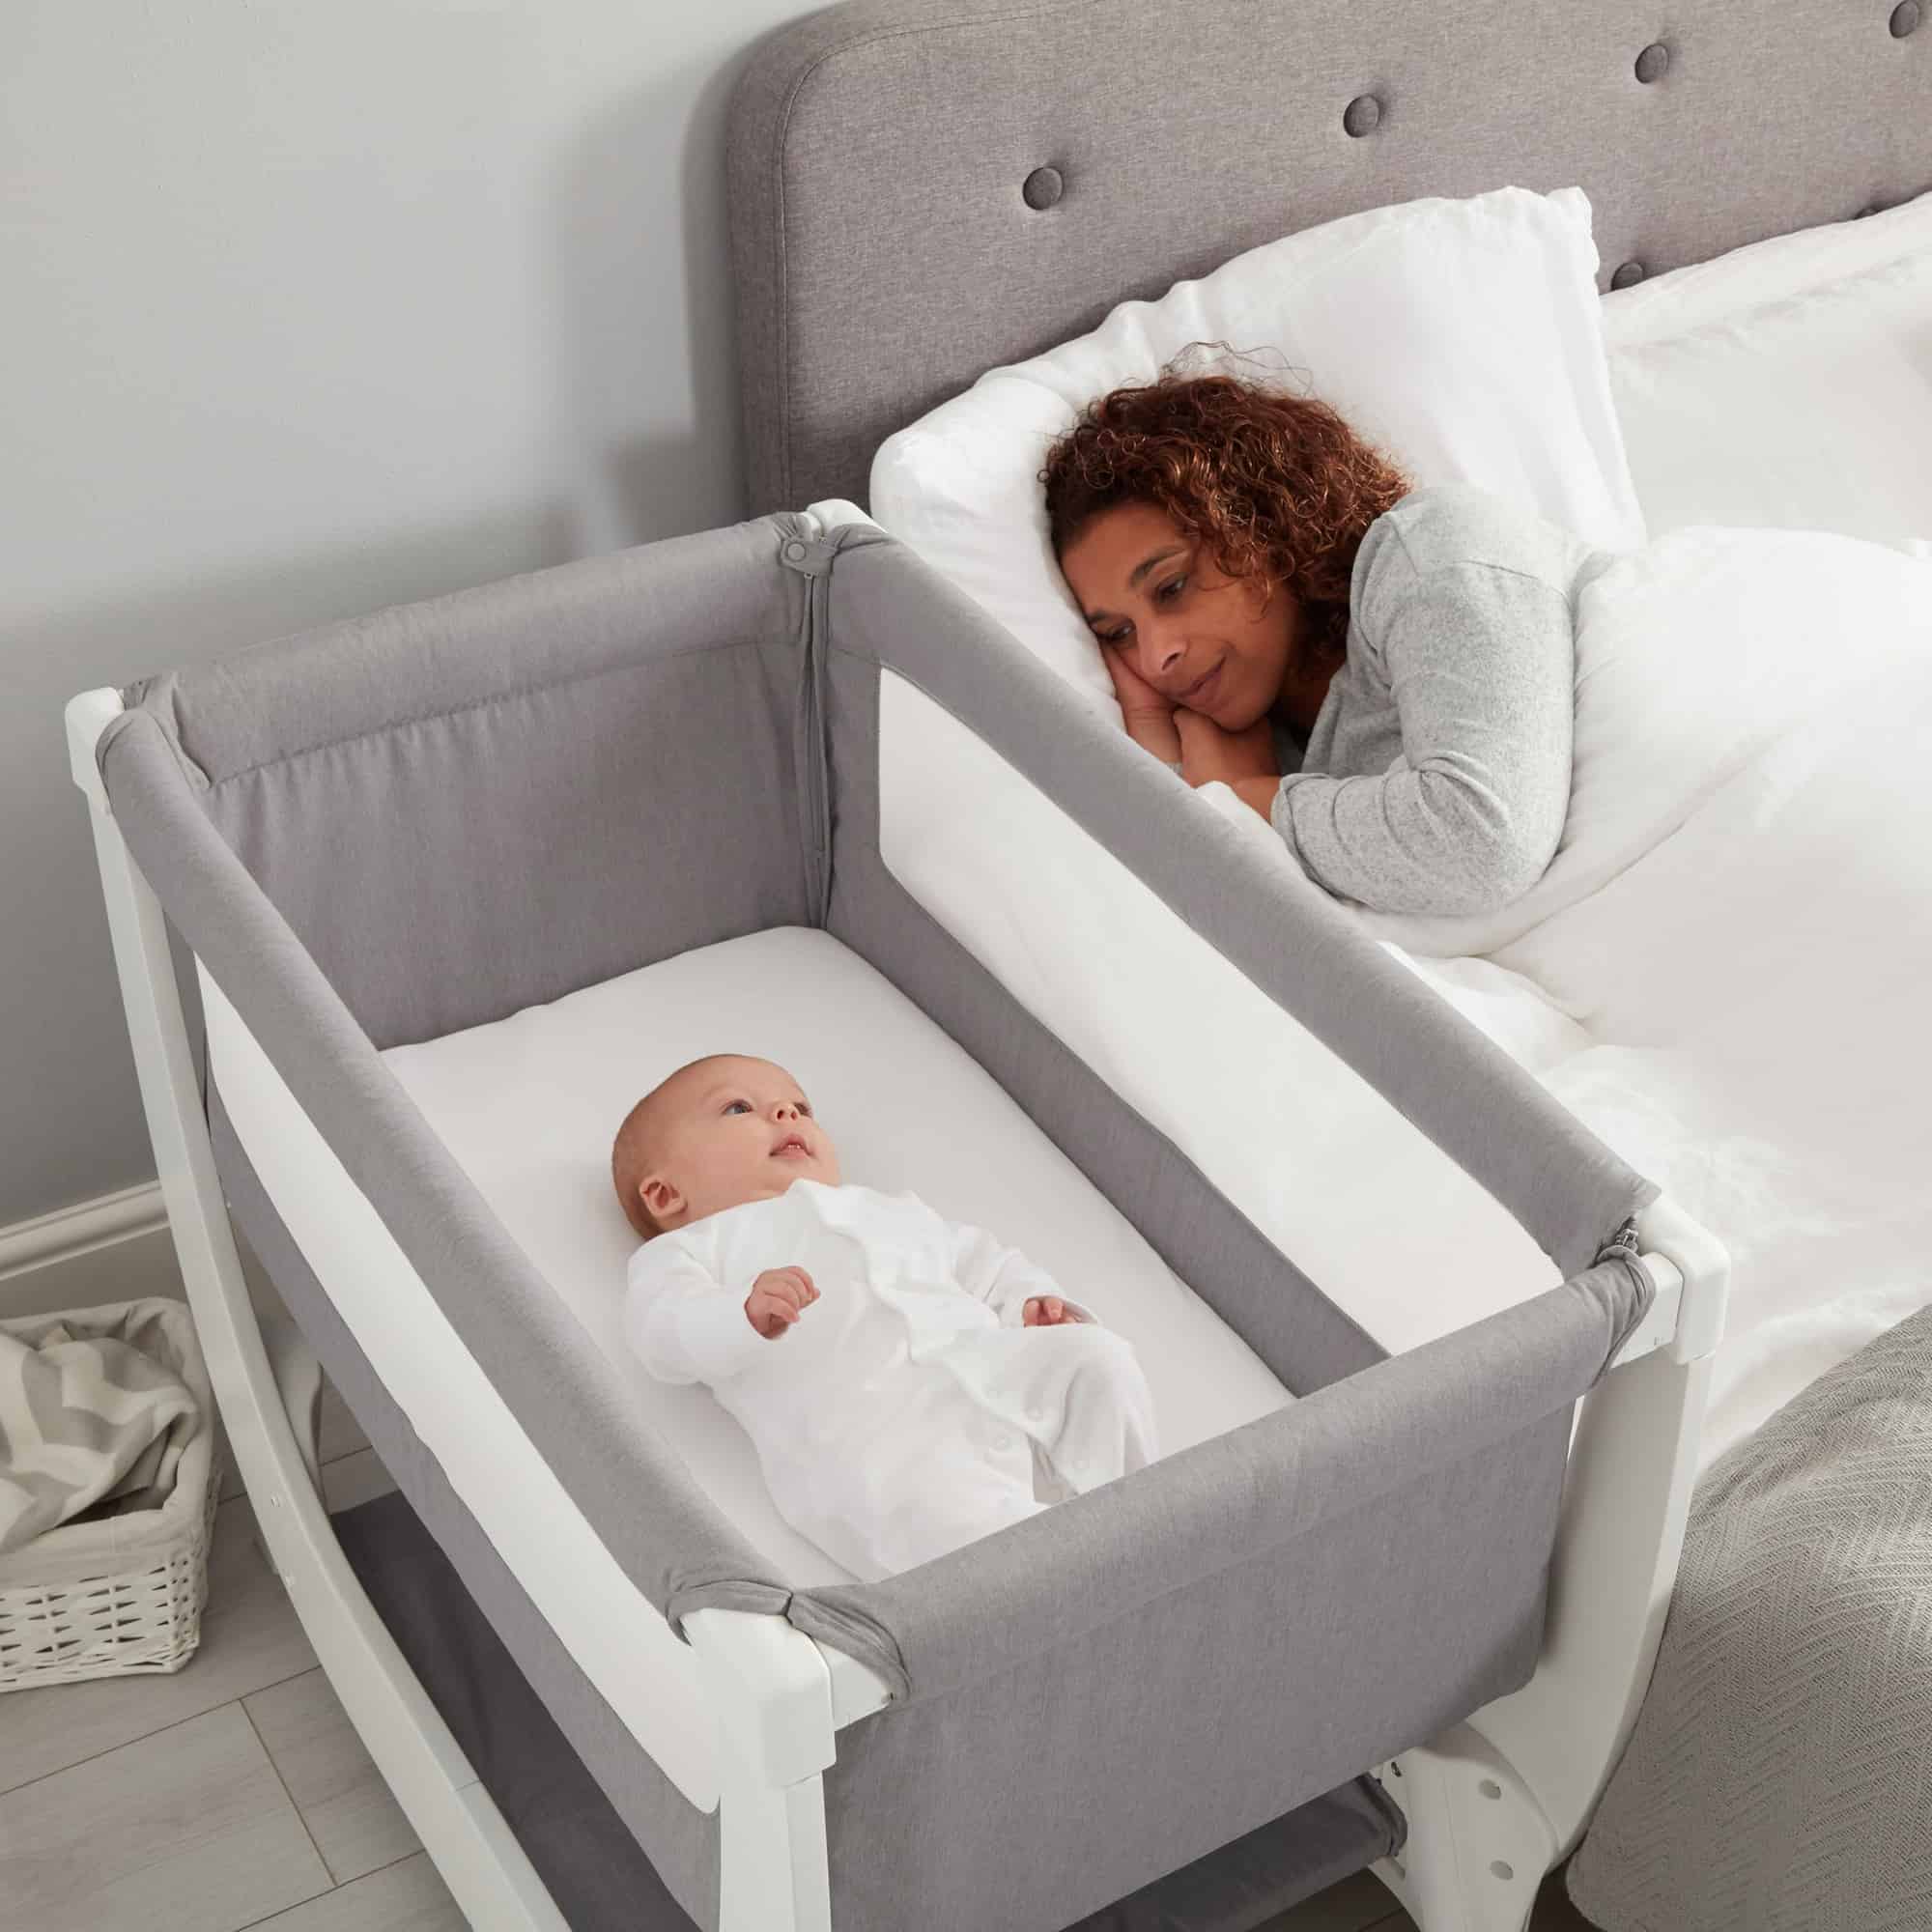 mom sleeping next to baby in bedside bassinet